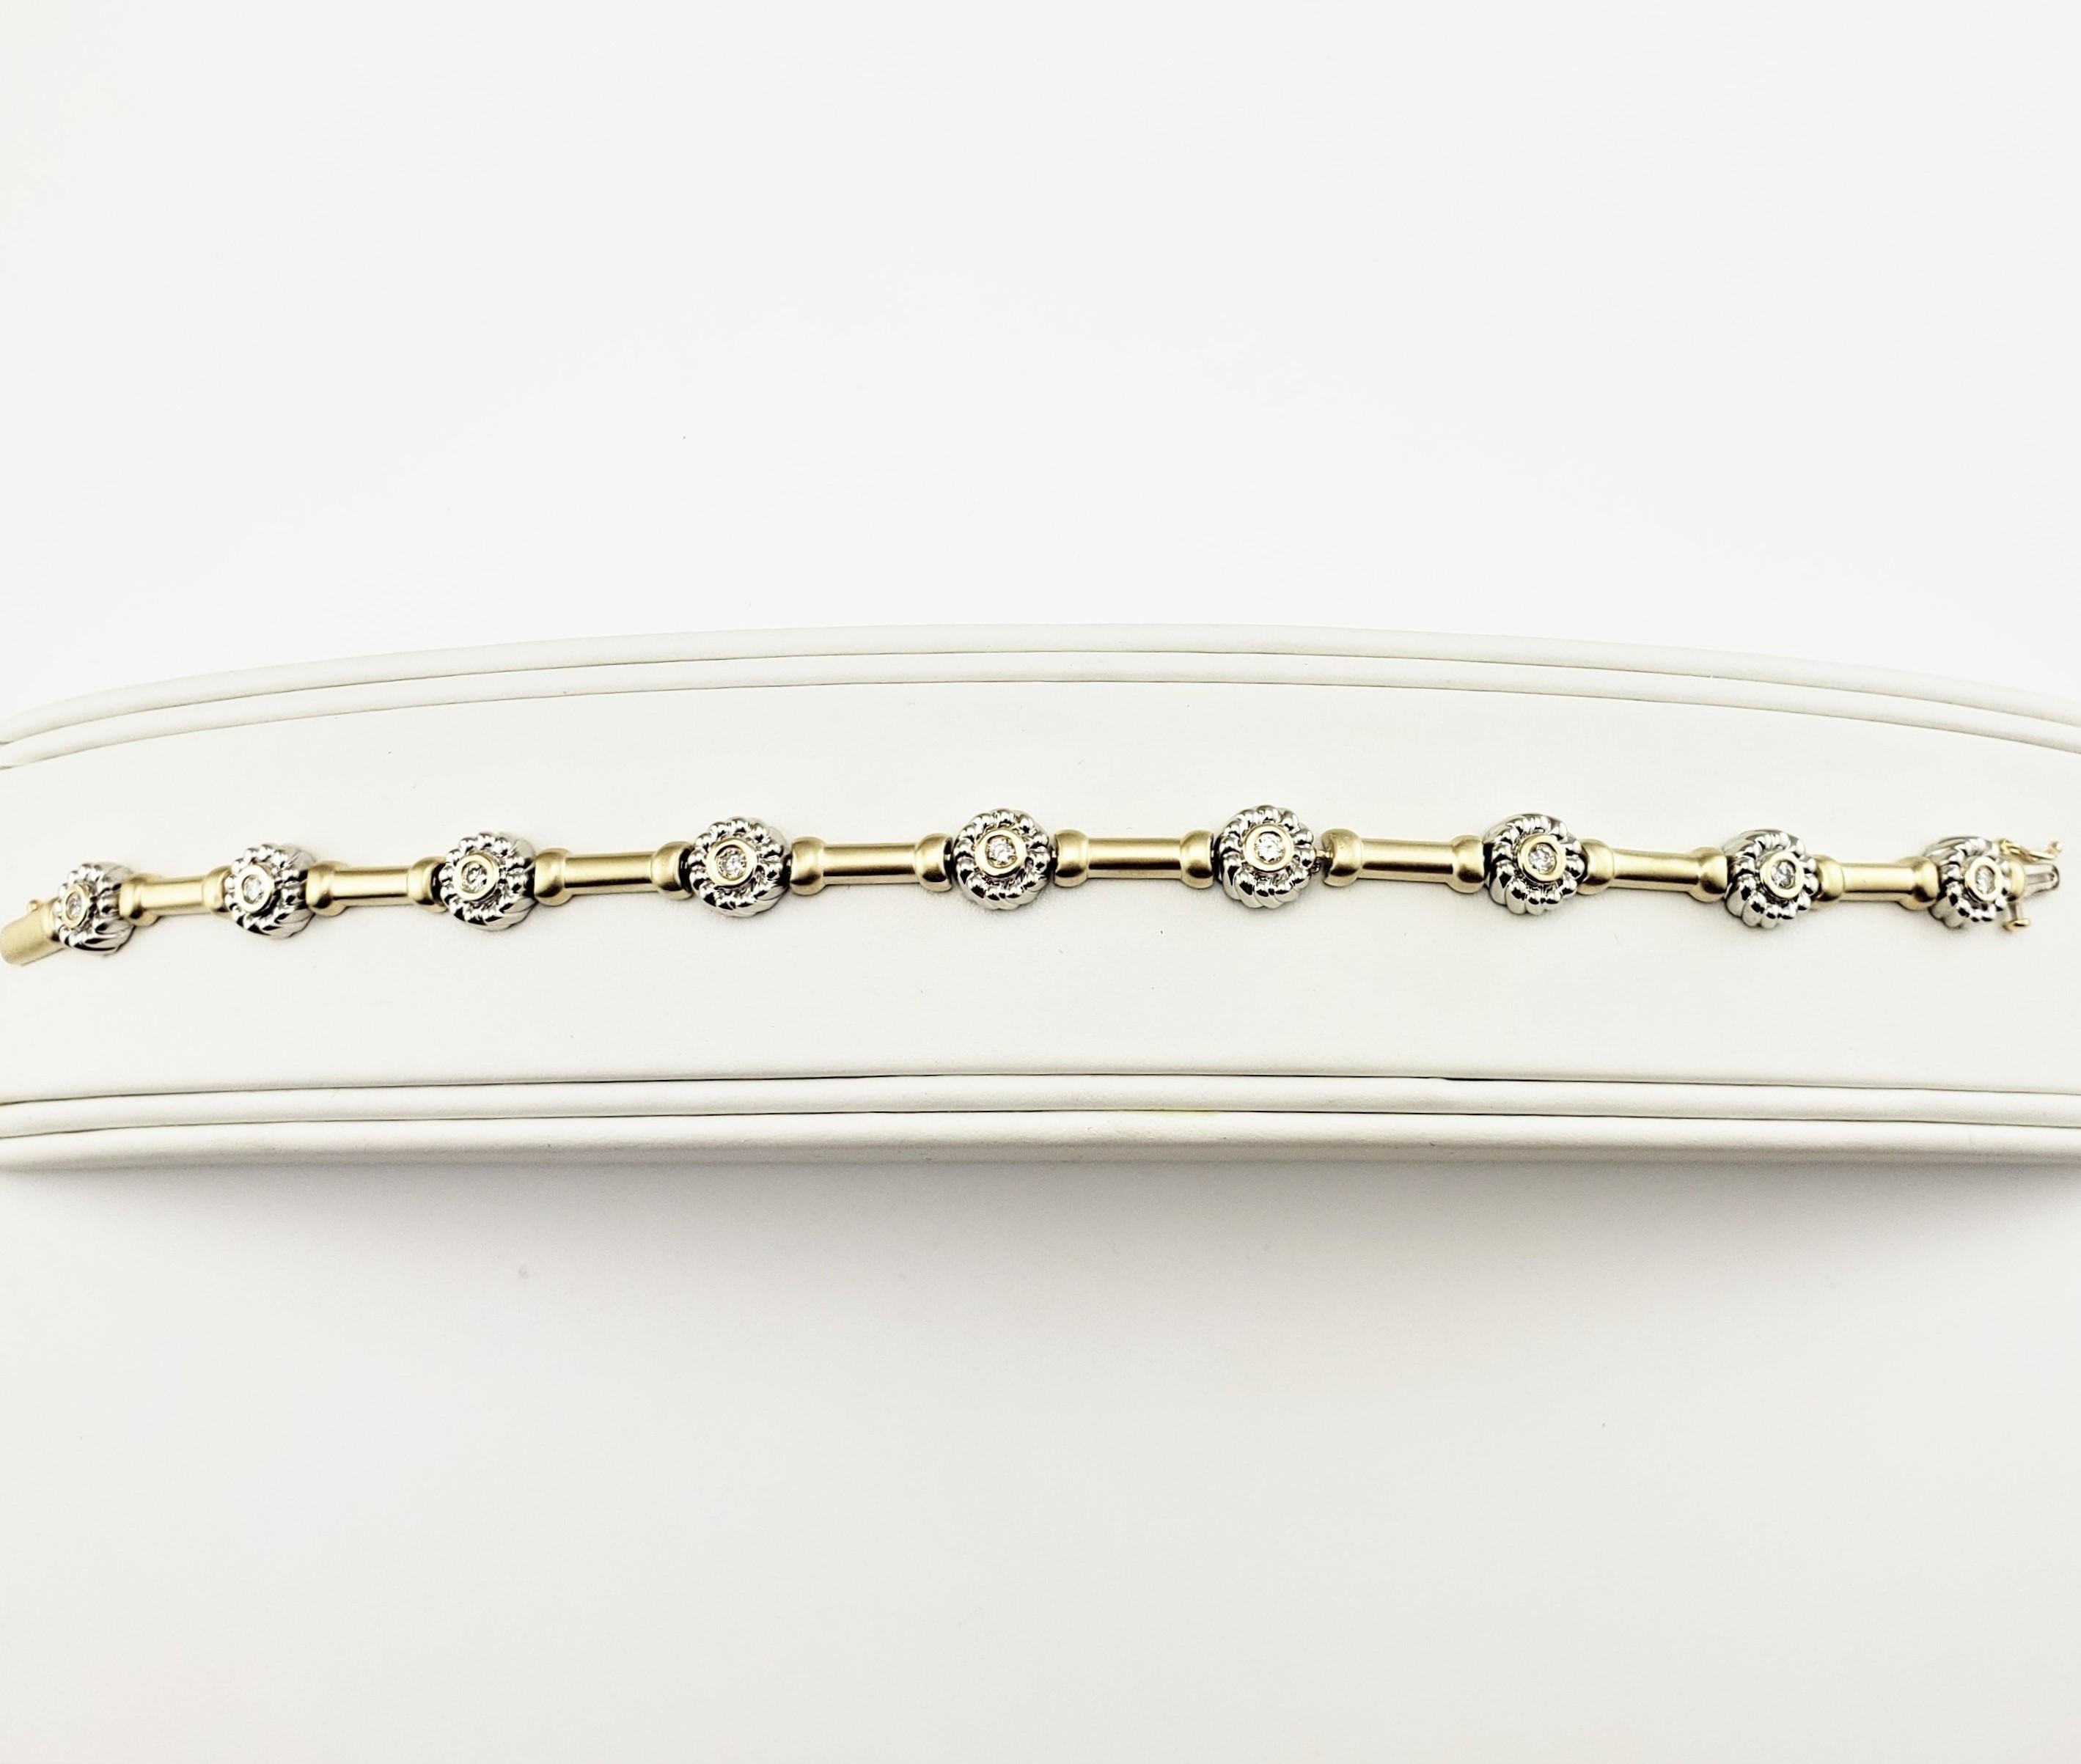 Vintage 14 Karat Yellow and White Gold Diamond Bracelet-

This stunning 14K yellow and white gold bracelet features nine round brilliant cut diamonds set in a lovely floral design.
Width: 8 mm.

Approximate total diamond weight: .45 ct.

Diamond